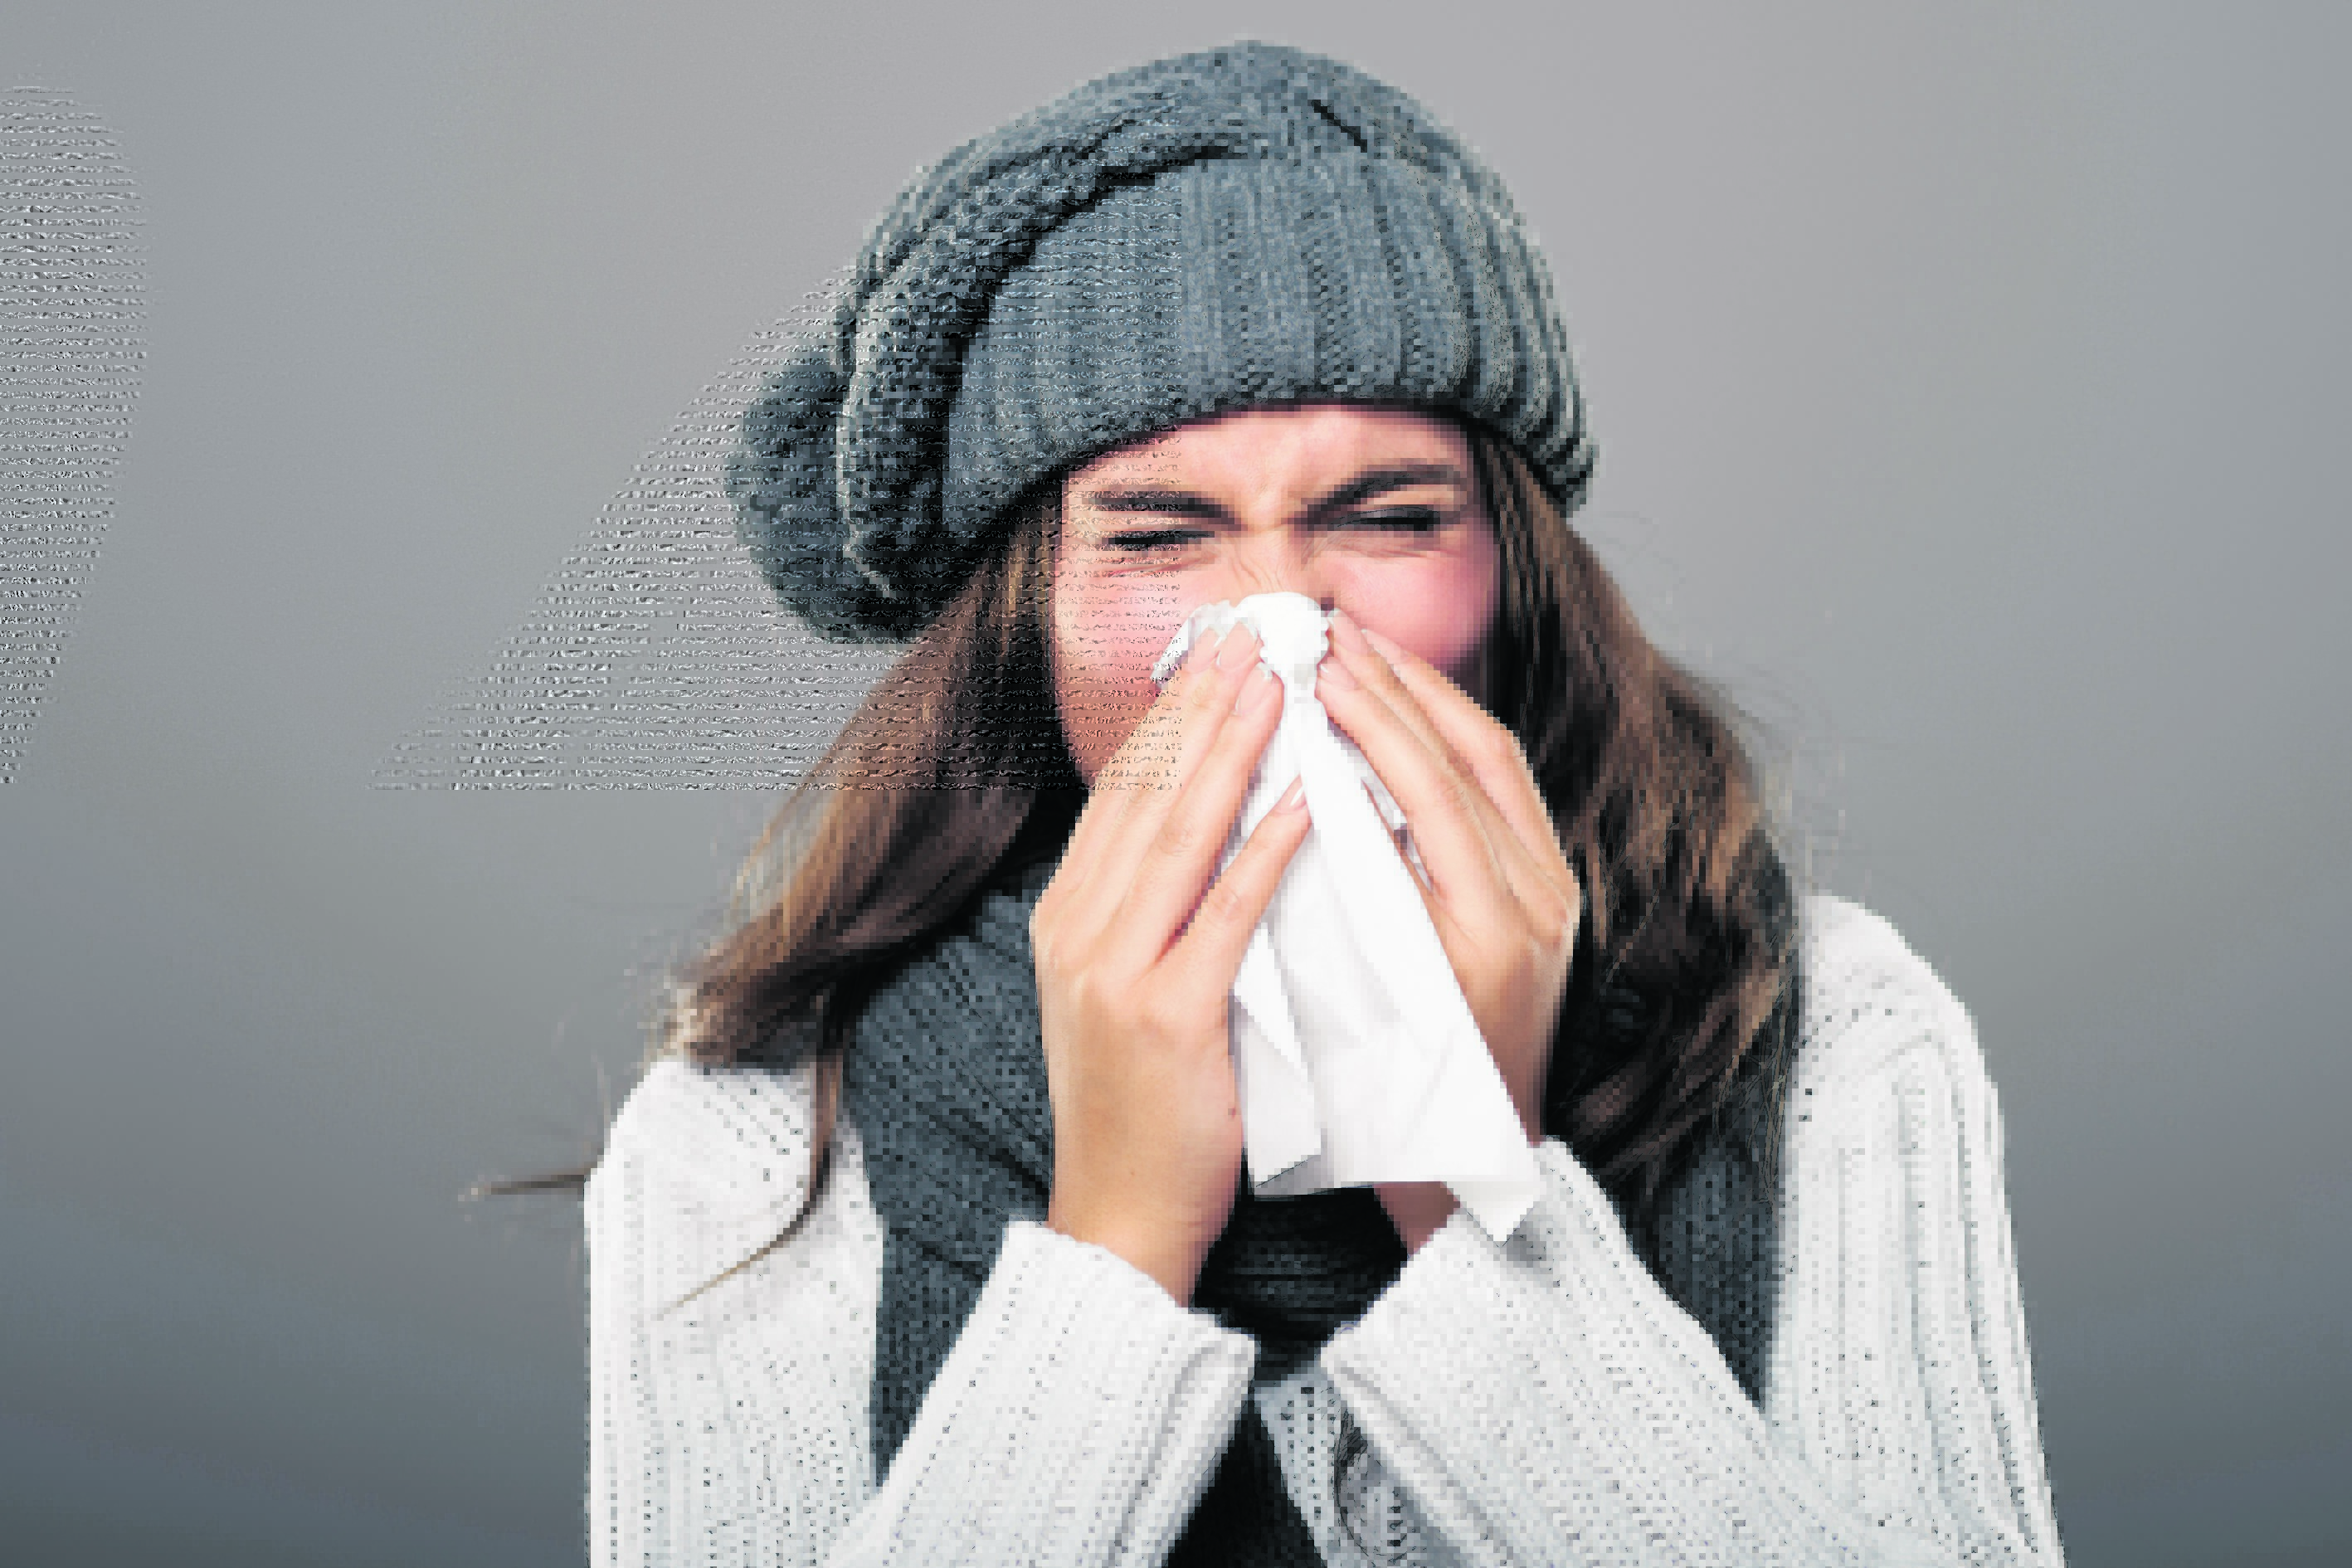 Sniffle season is here – but how can you tell which virus you’ve got?